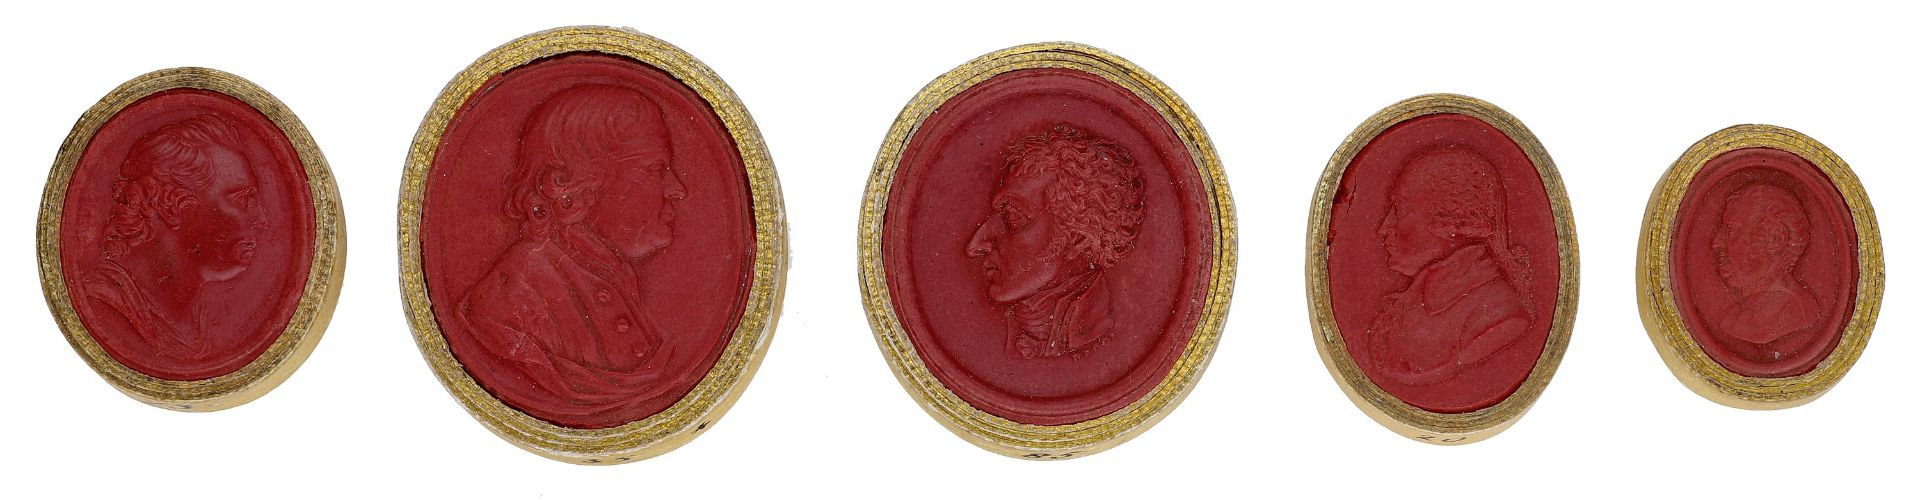 Five oval 'red sulphur' portrait medallions, by James Tassie, within numbered gilt-edged pap...